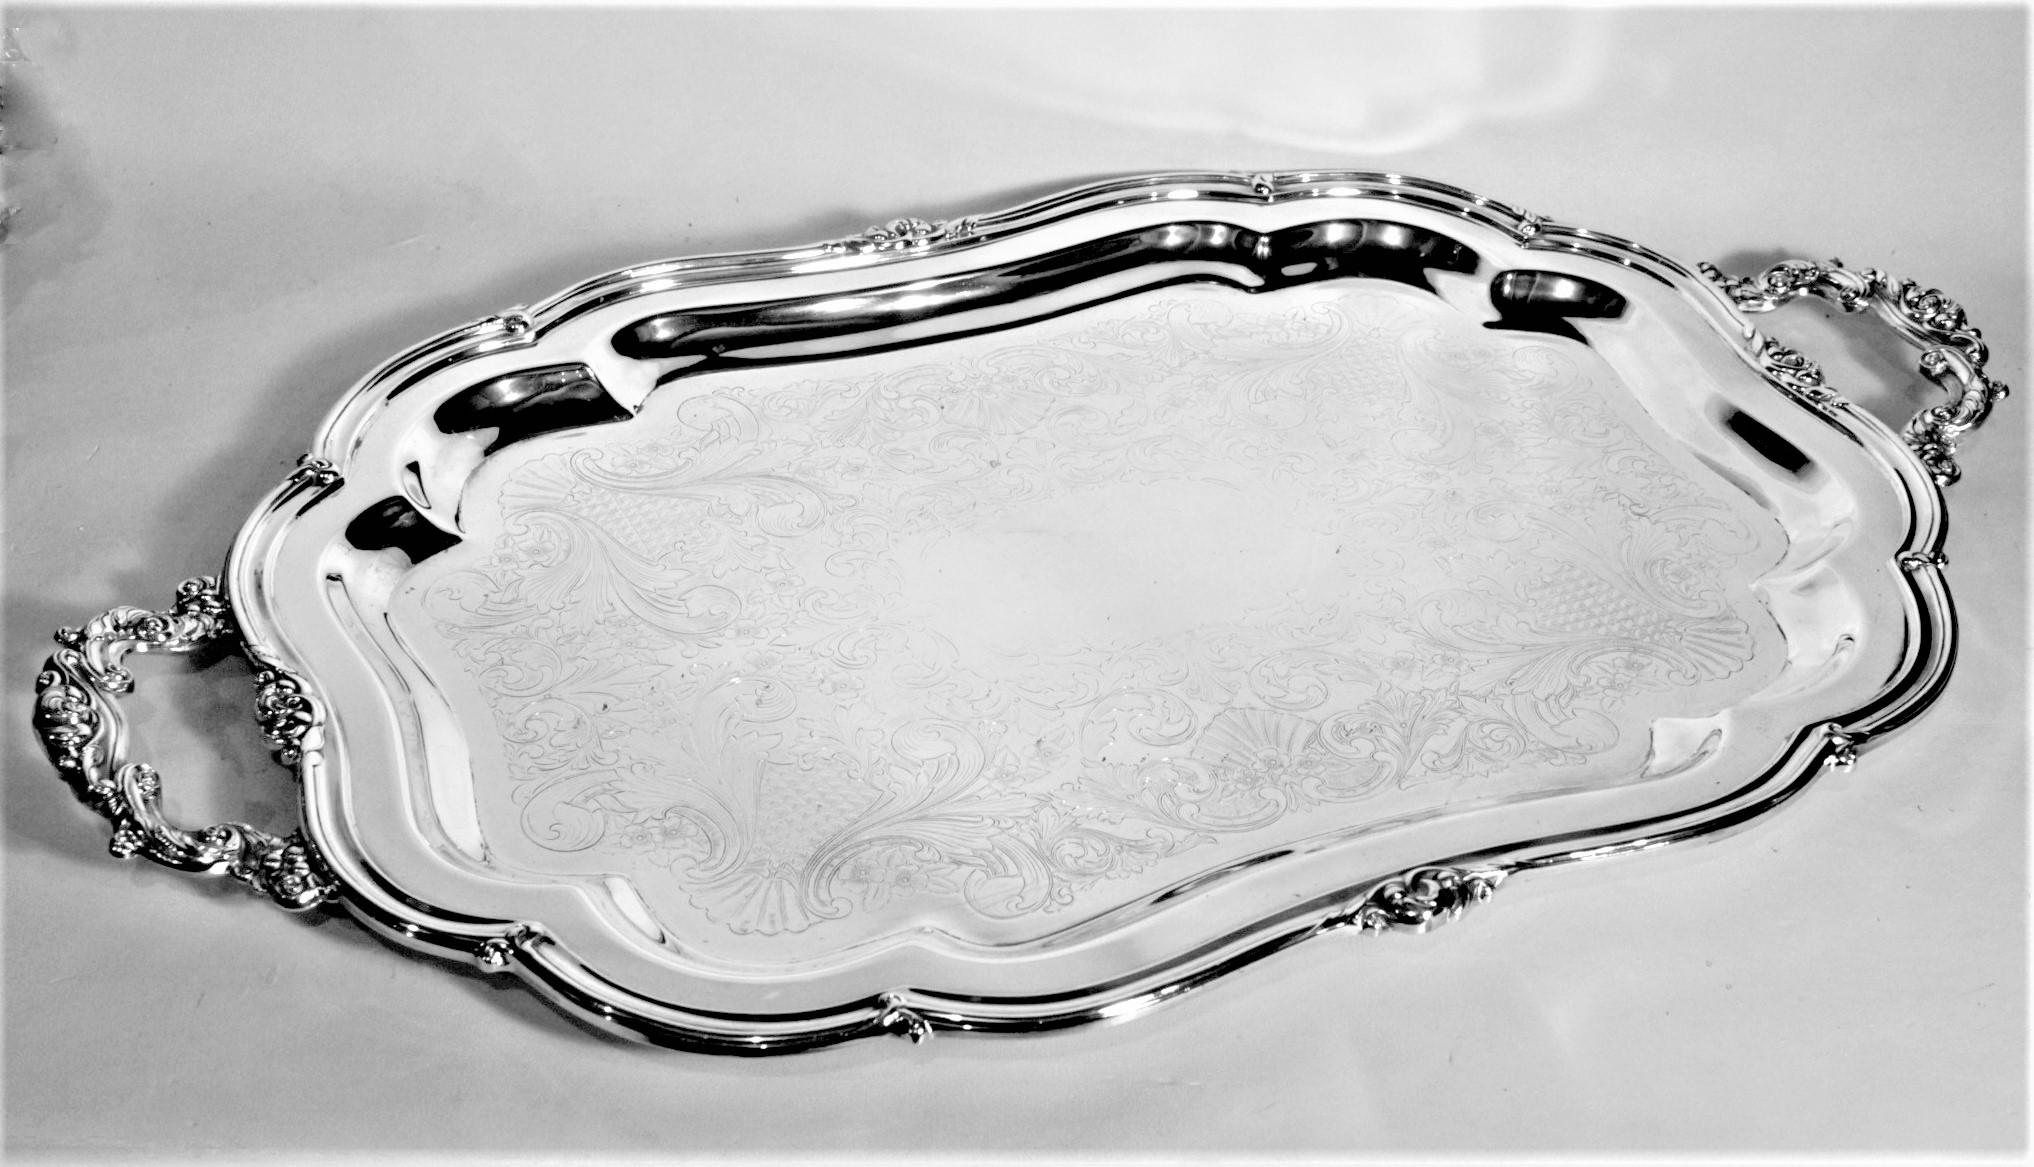 Victorian Large Antique Styled Silver Plated Serving Tray with Ornate Engraving & Handles